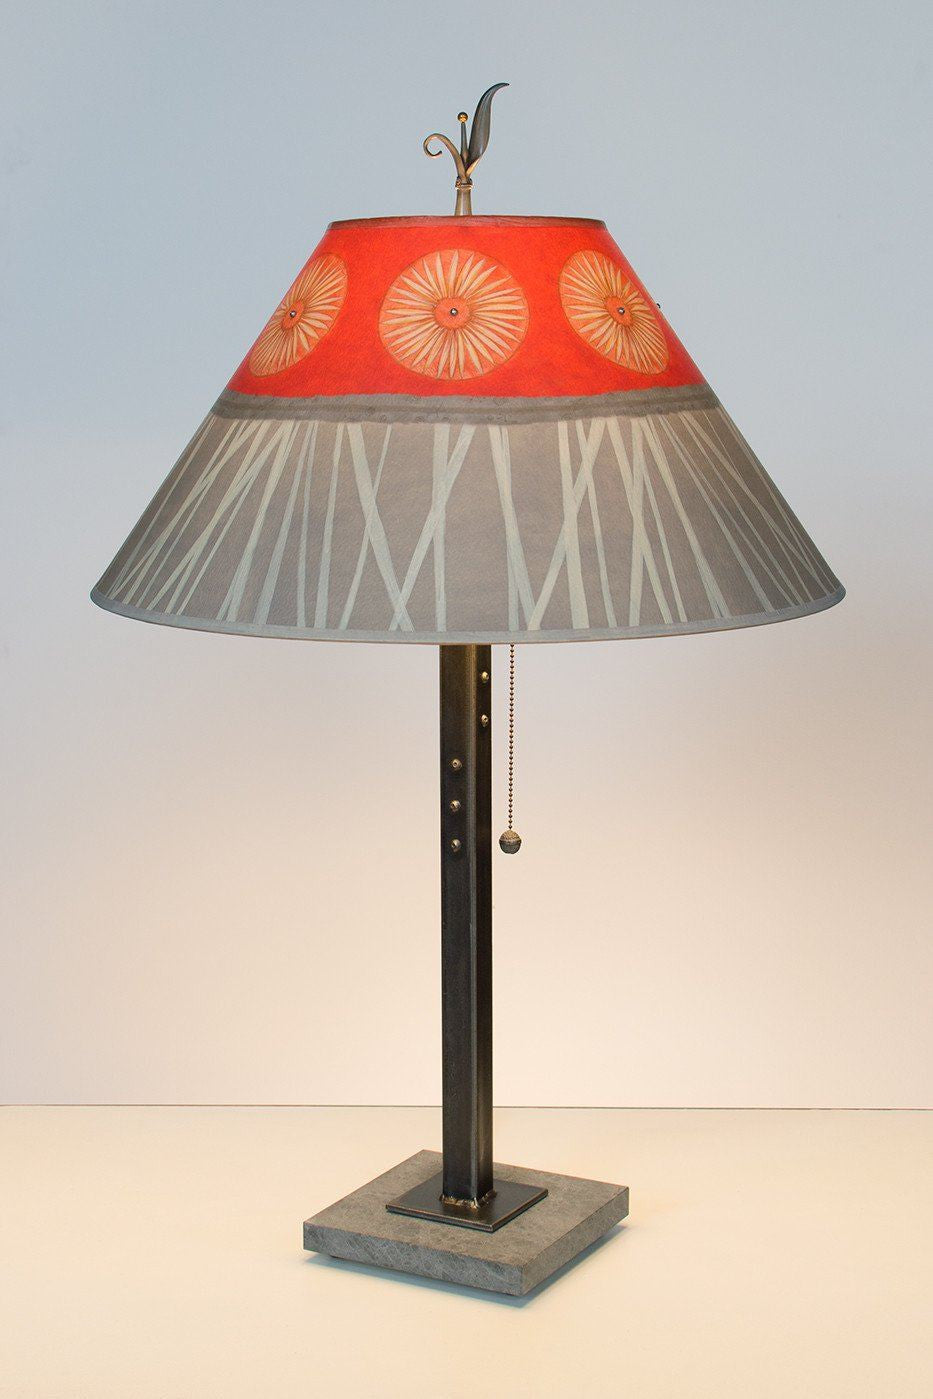 Janna Ugone &amp; Co Table Lamps Steel Table Lamp with Large Conical Shade in Tang